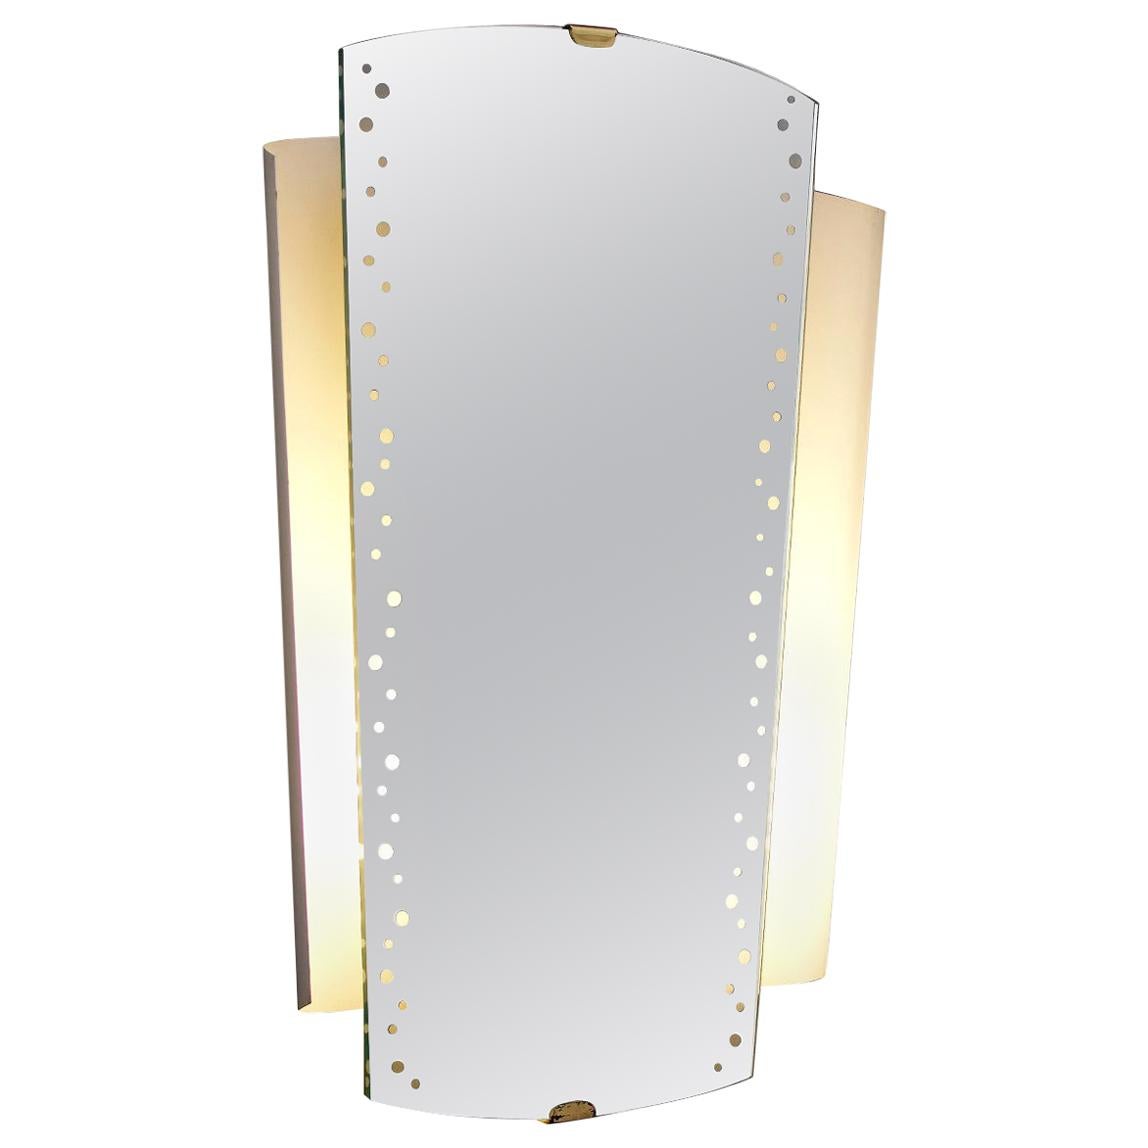 Illuminated Mirror with Brass Detail by Ernst Igl for Hillebrand, Germany, 1960s